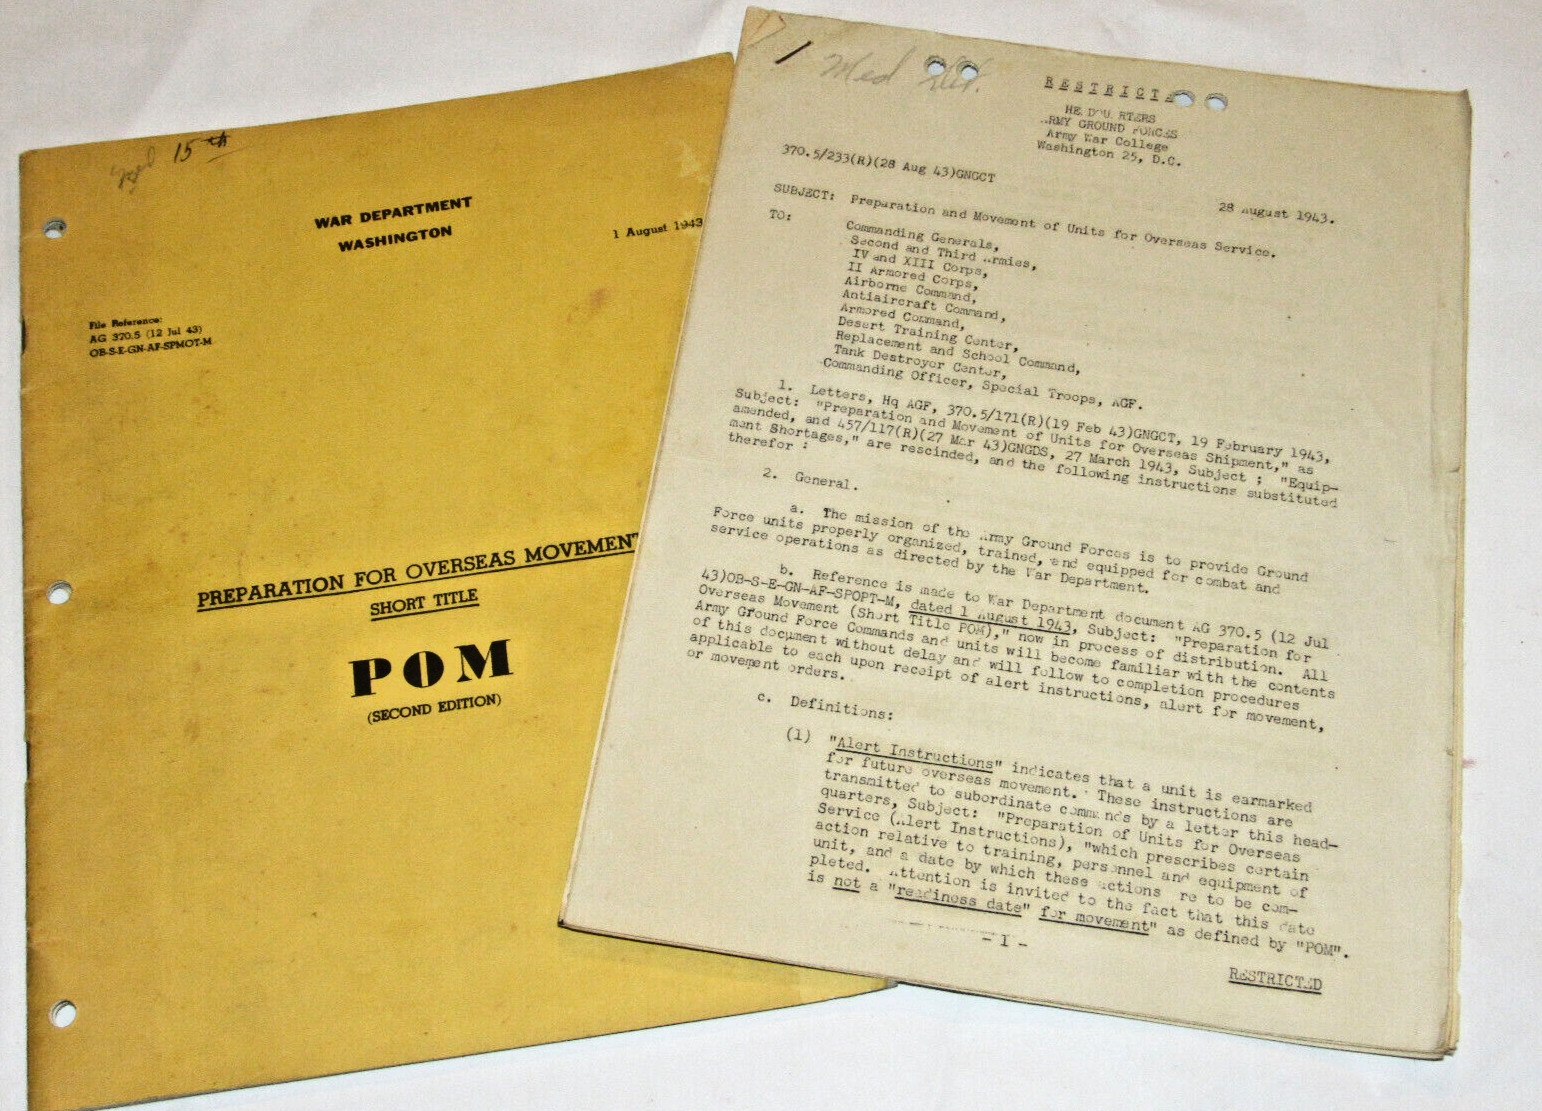 VTG 1943 WWII MANUAL 'PREPARATION FOR OVERSEAS MOVEMENT, POM' & RESTRICTED SUPPL